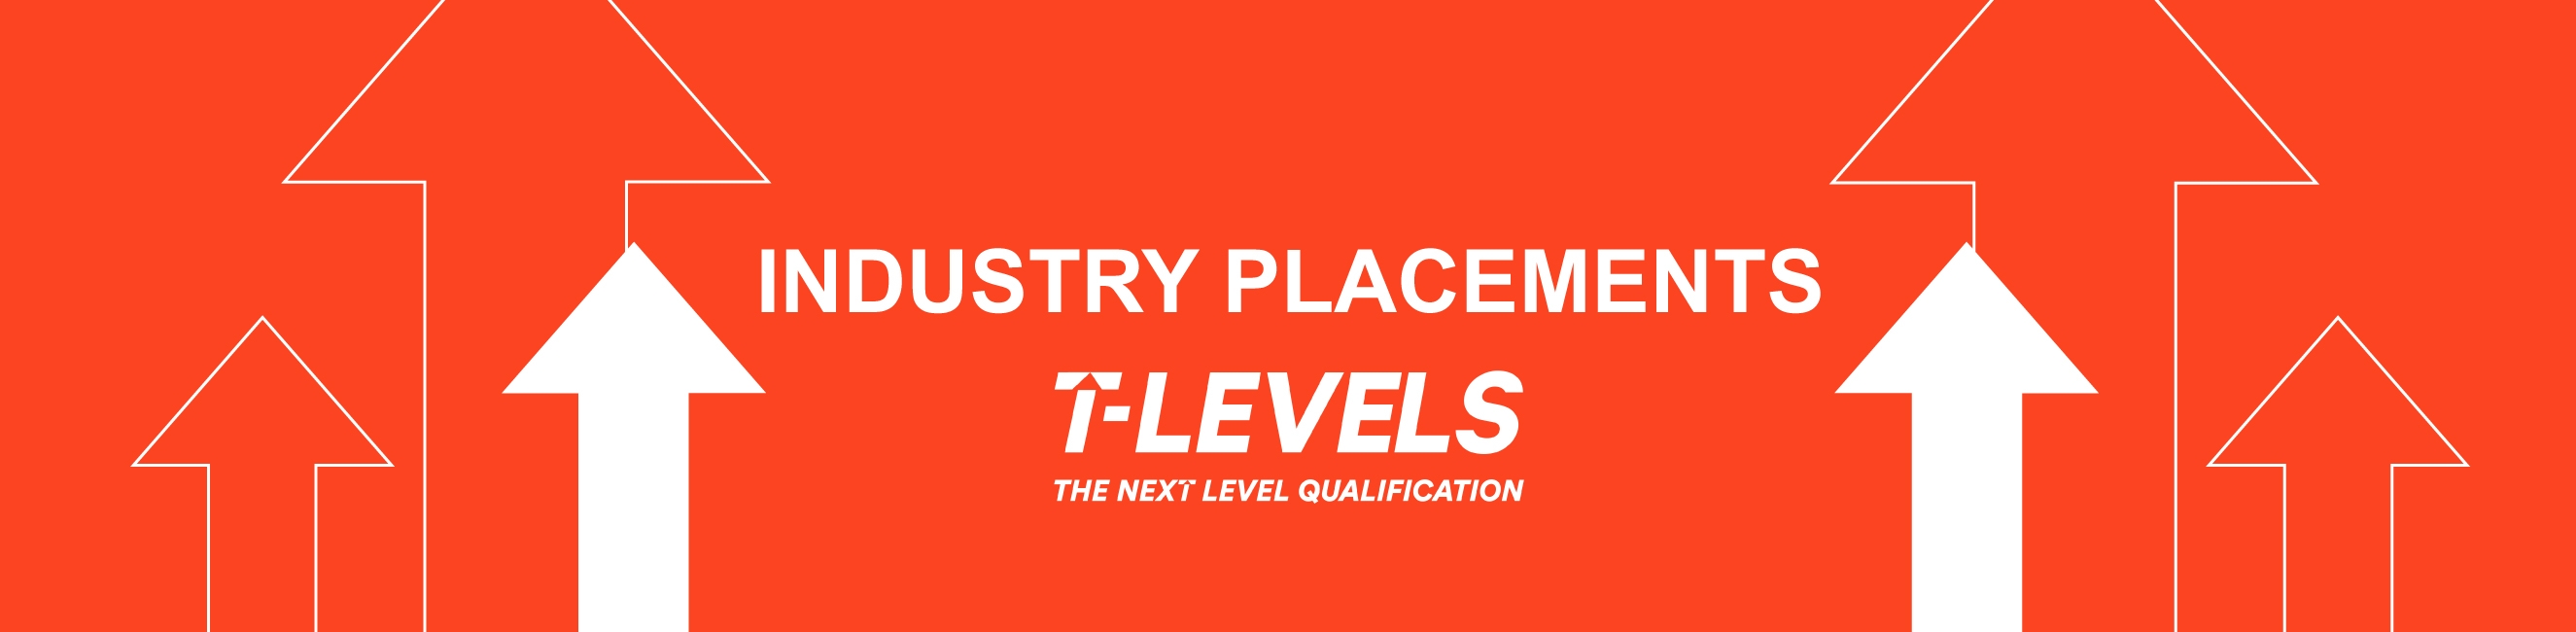 Industry Placements for employers, businesses, in Bristol, Weston, Somerset, North Somerset, T Levels